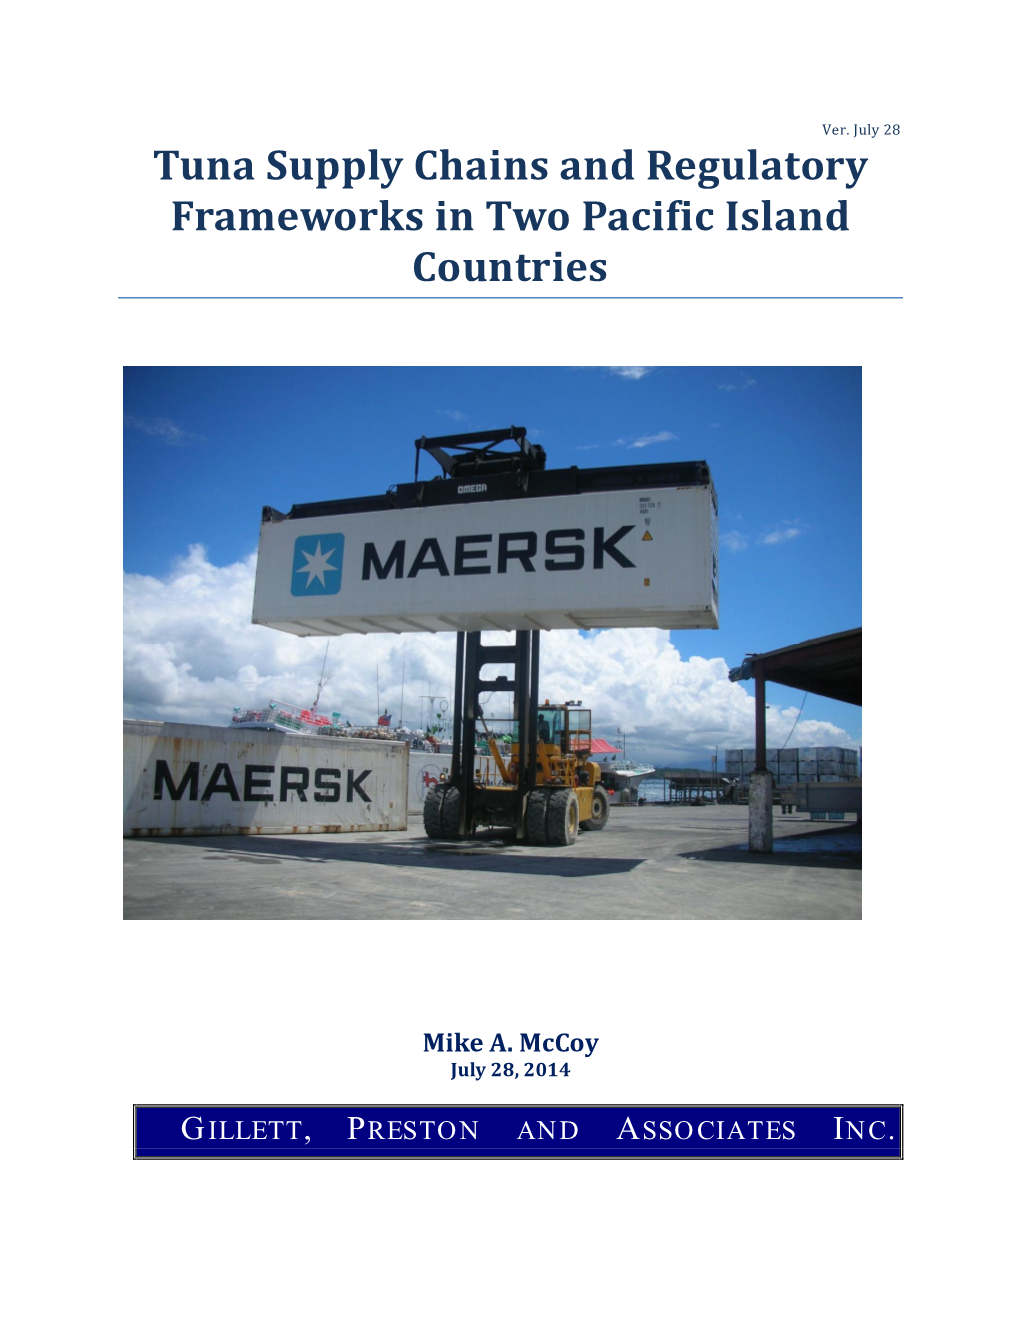 Tuna Supply Chains and Regulatory Frameworks in Two Pacific Island